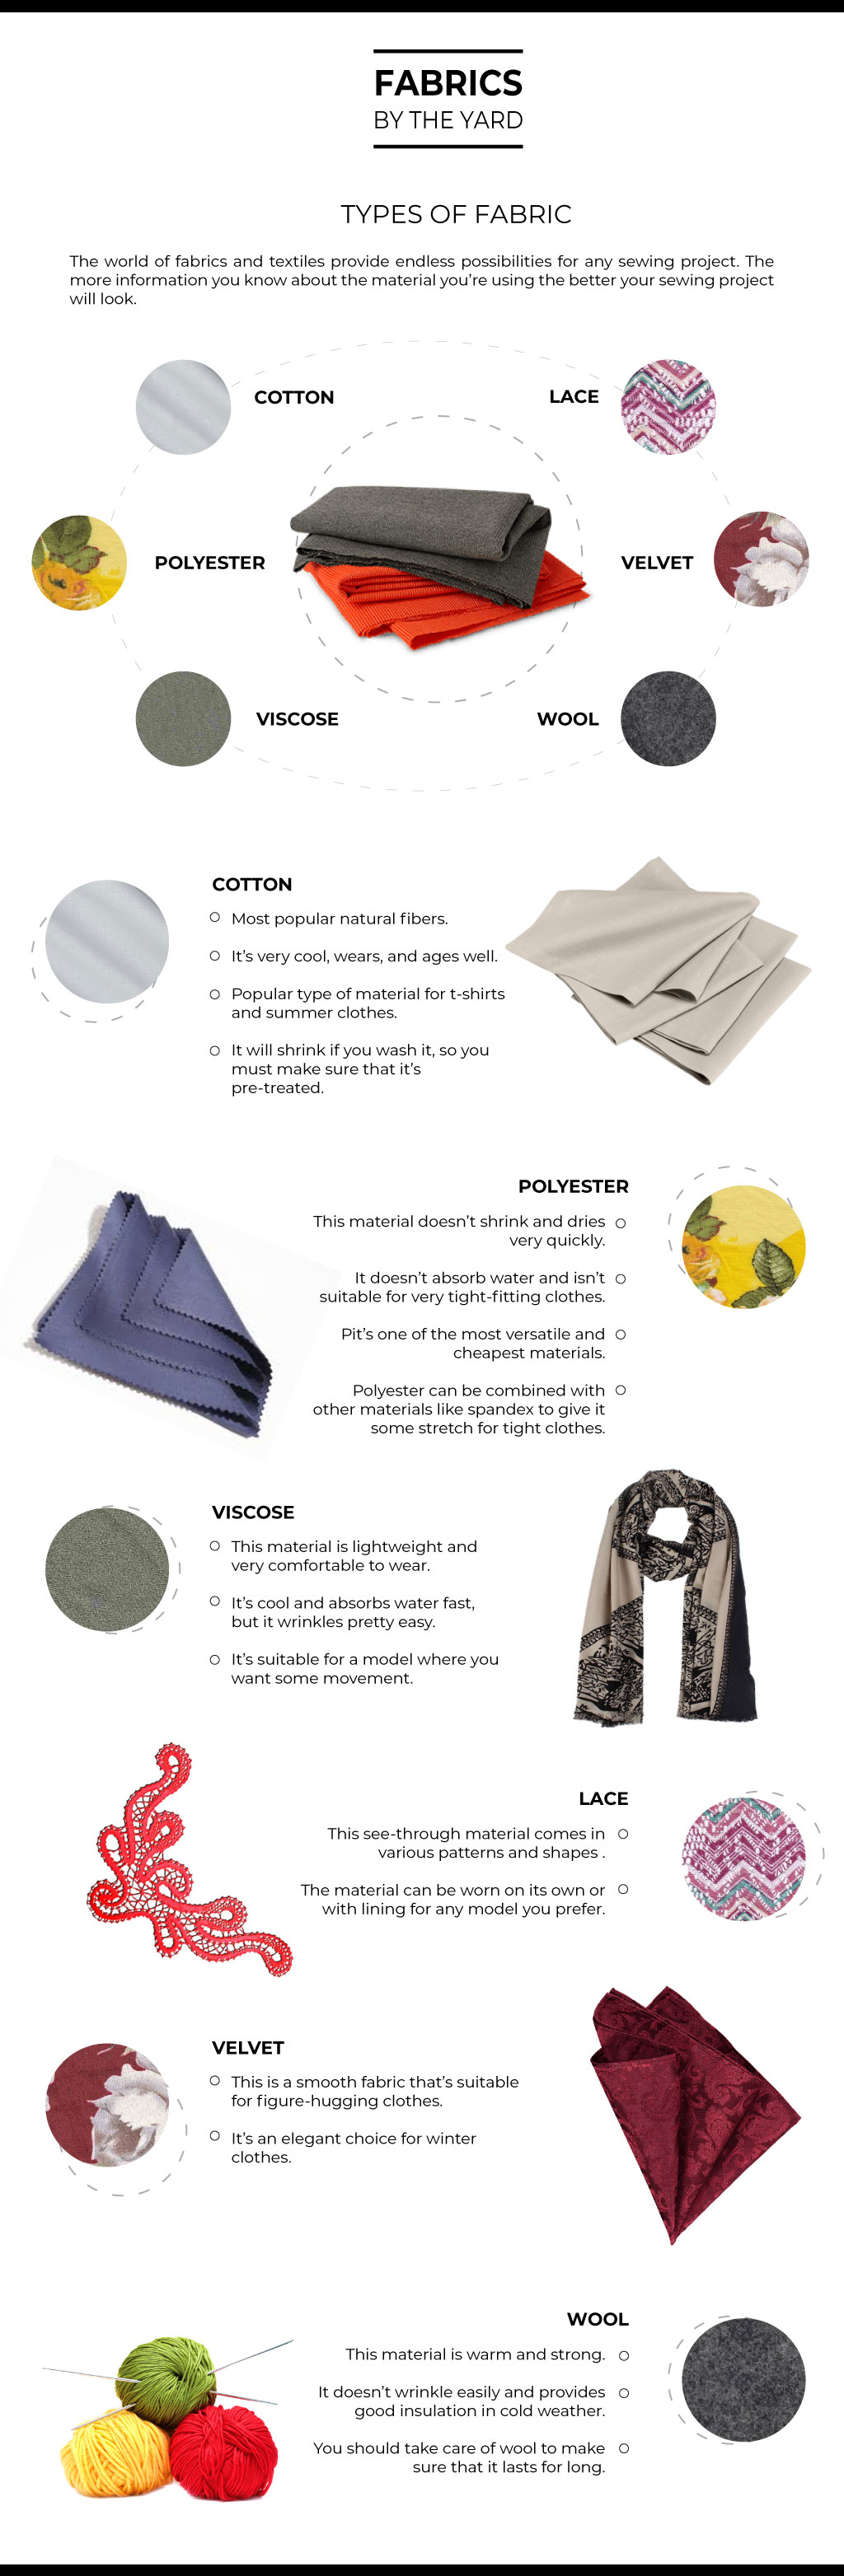 The Ultimate Fabric Guide - 2019 - Fabrics by the Yard